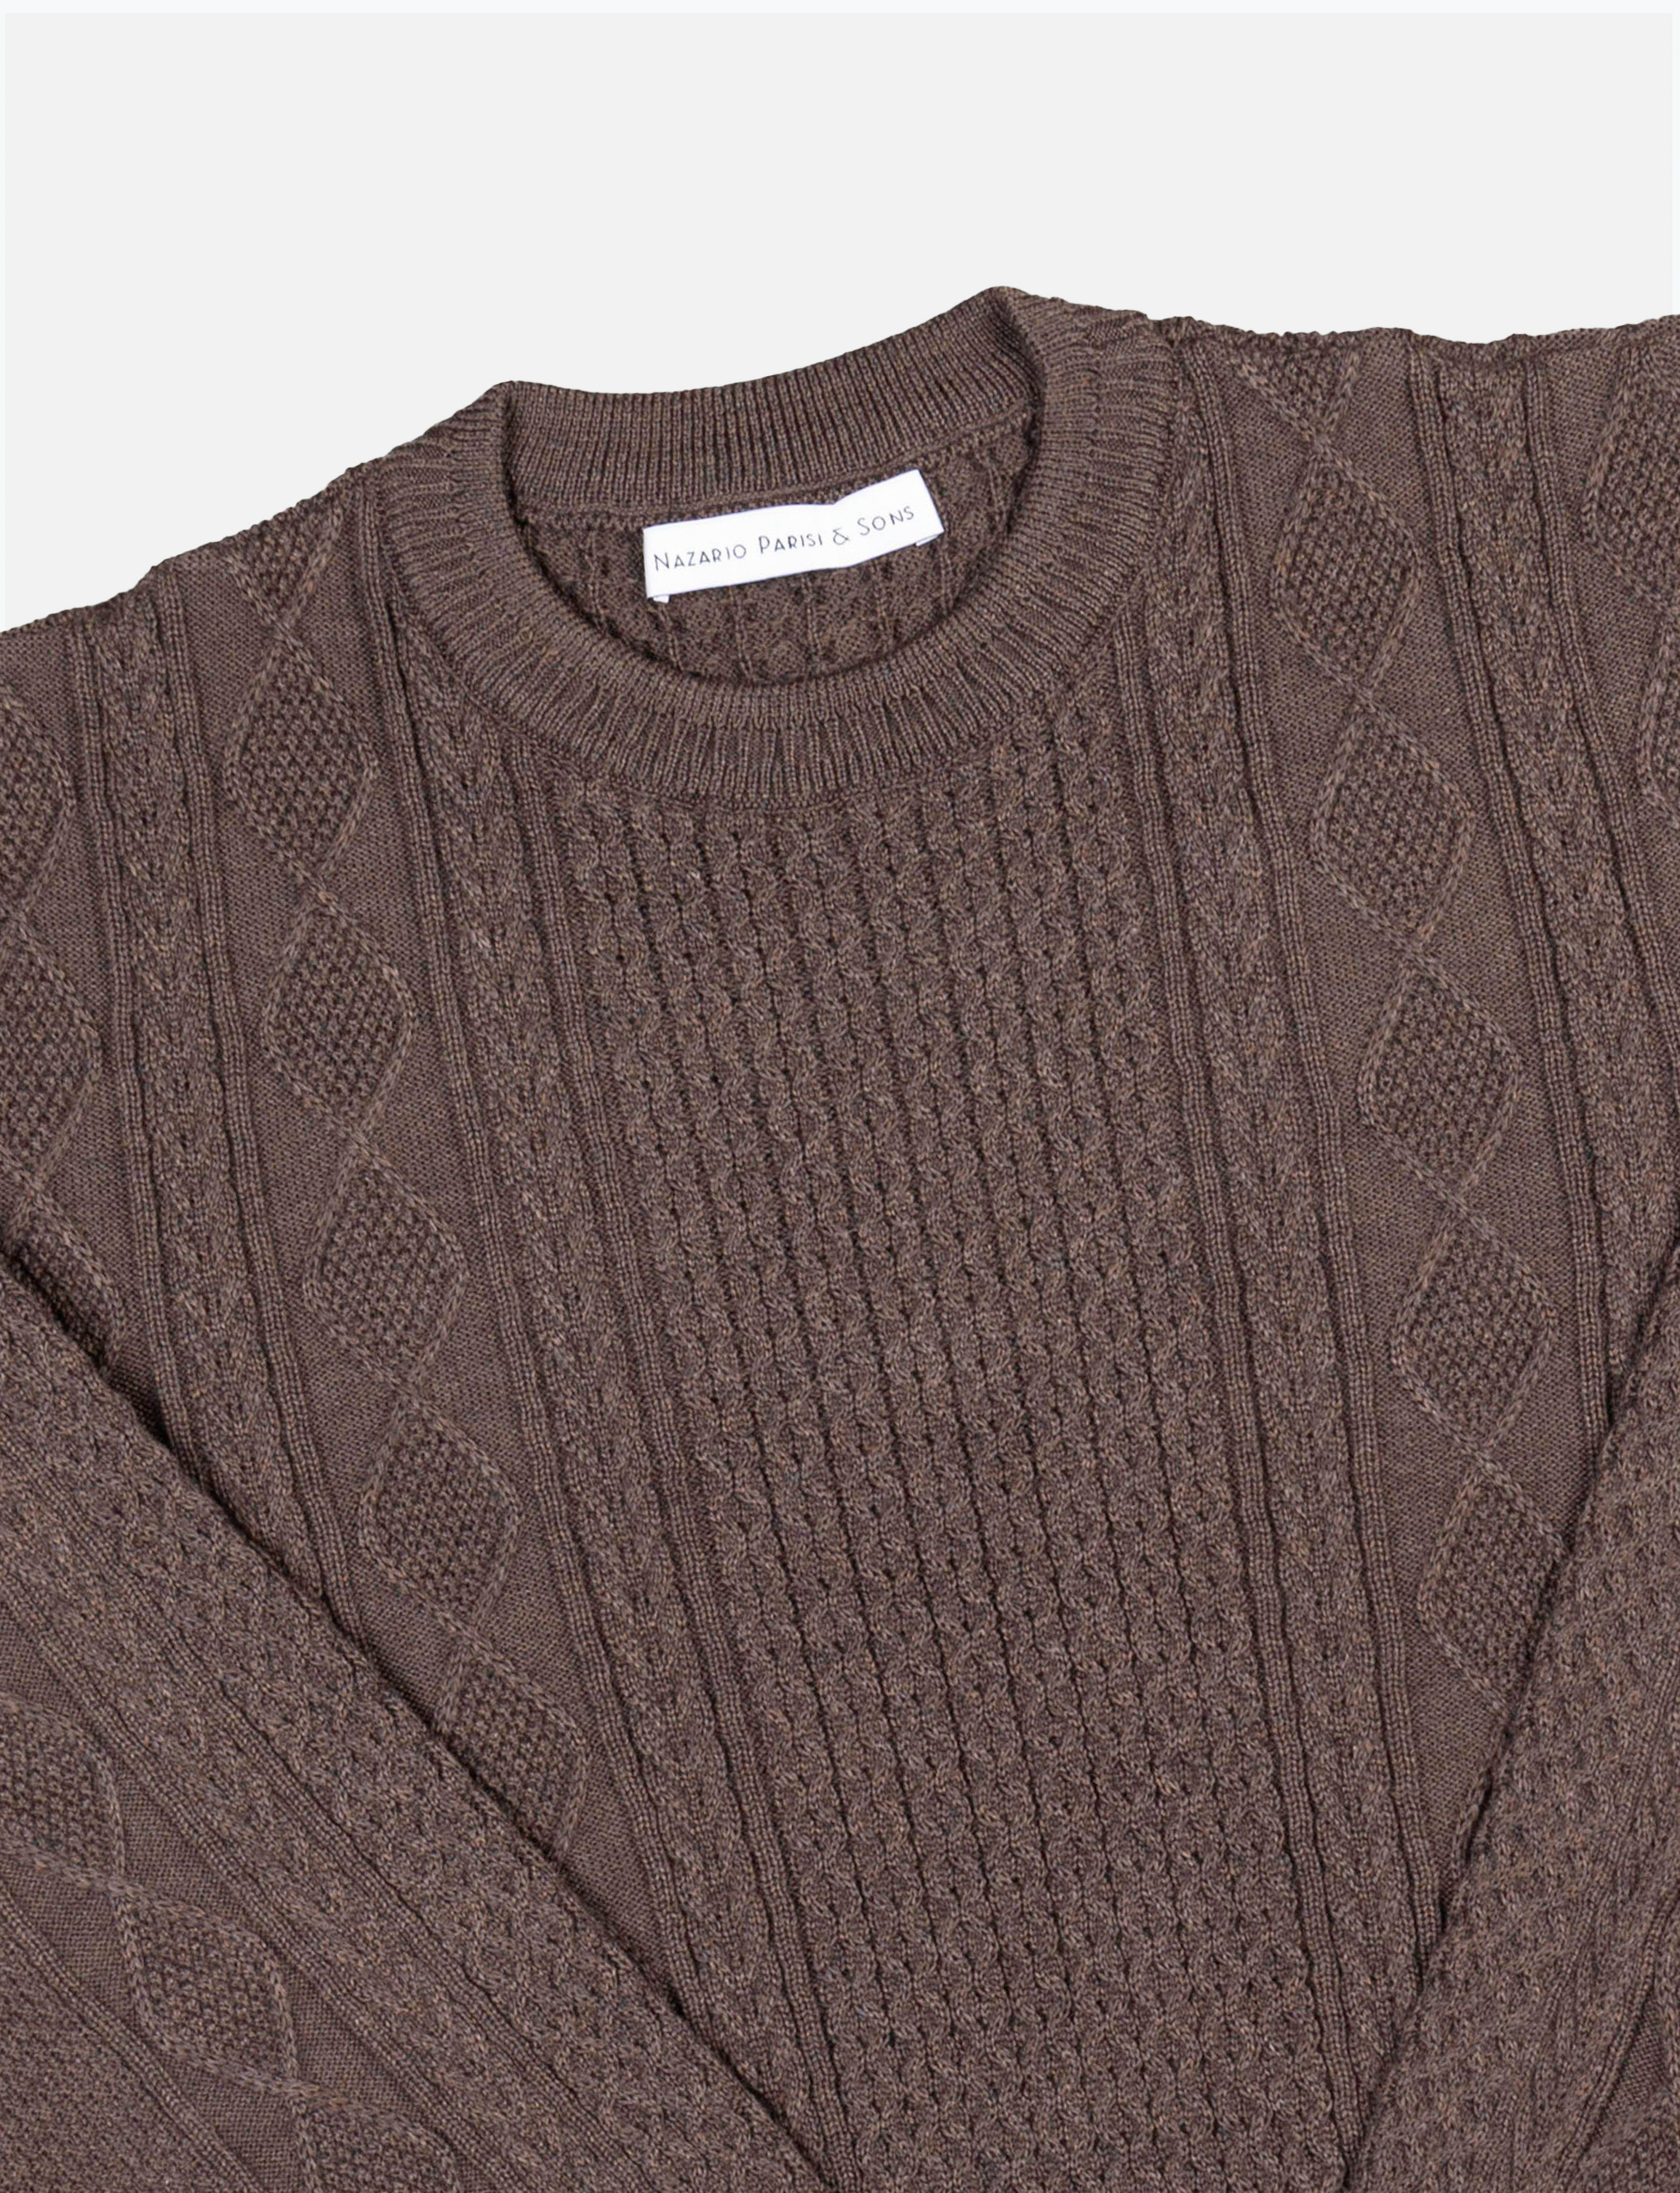 Brown Honeycomb Cable Knit